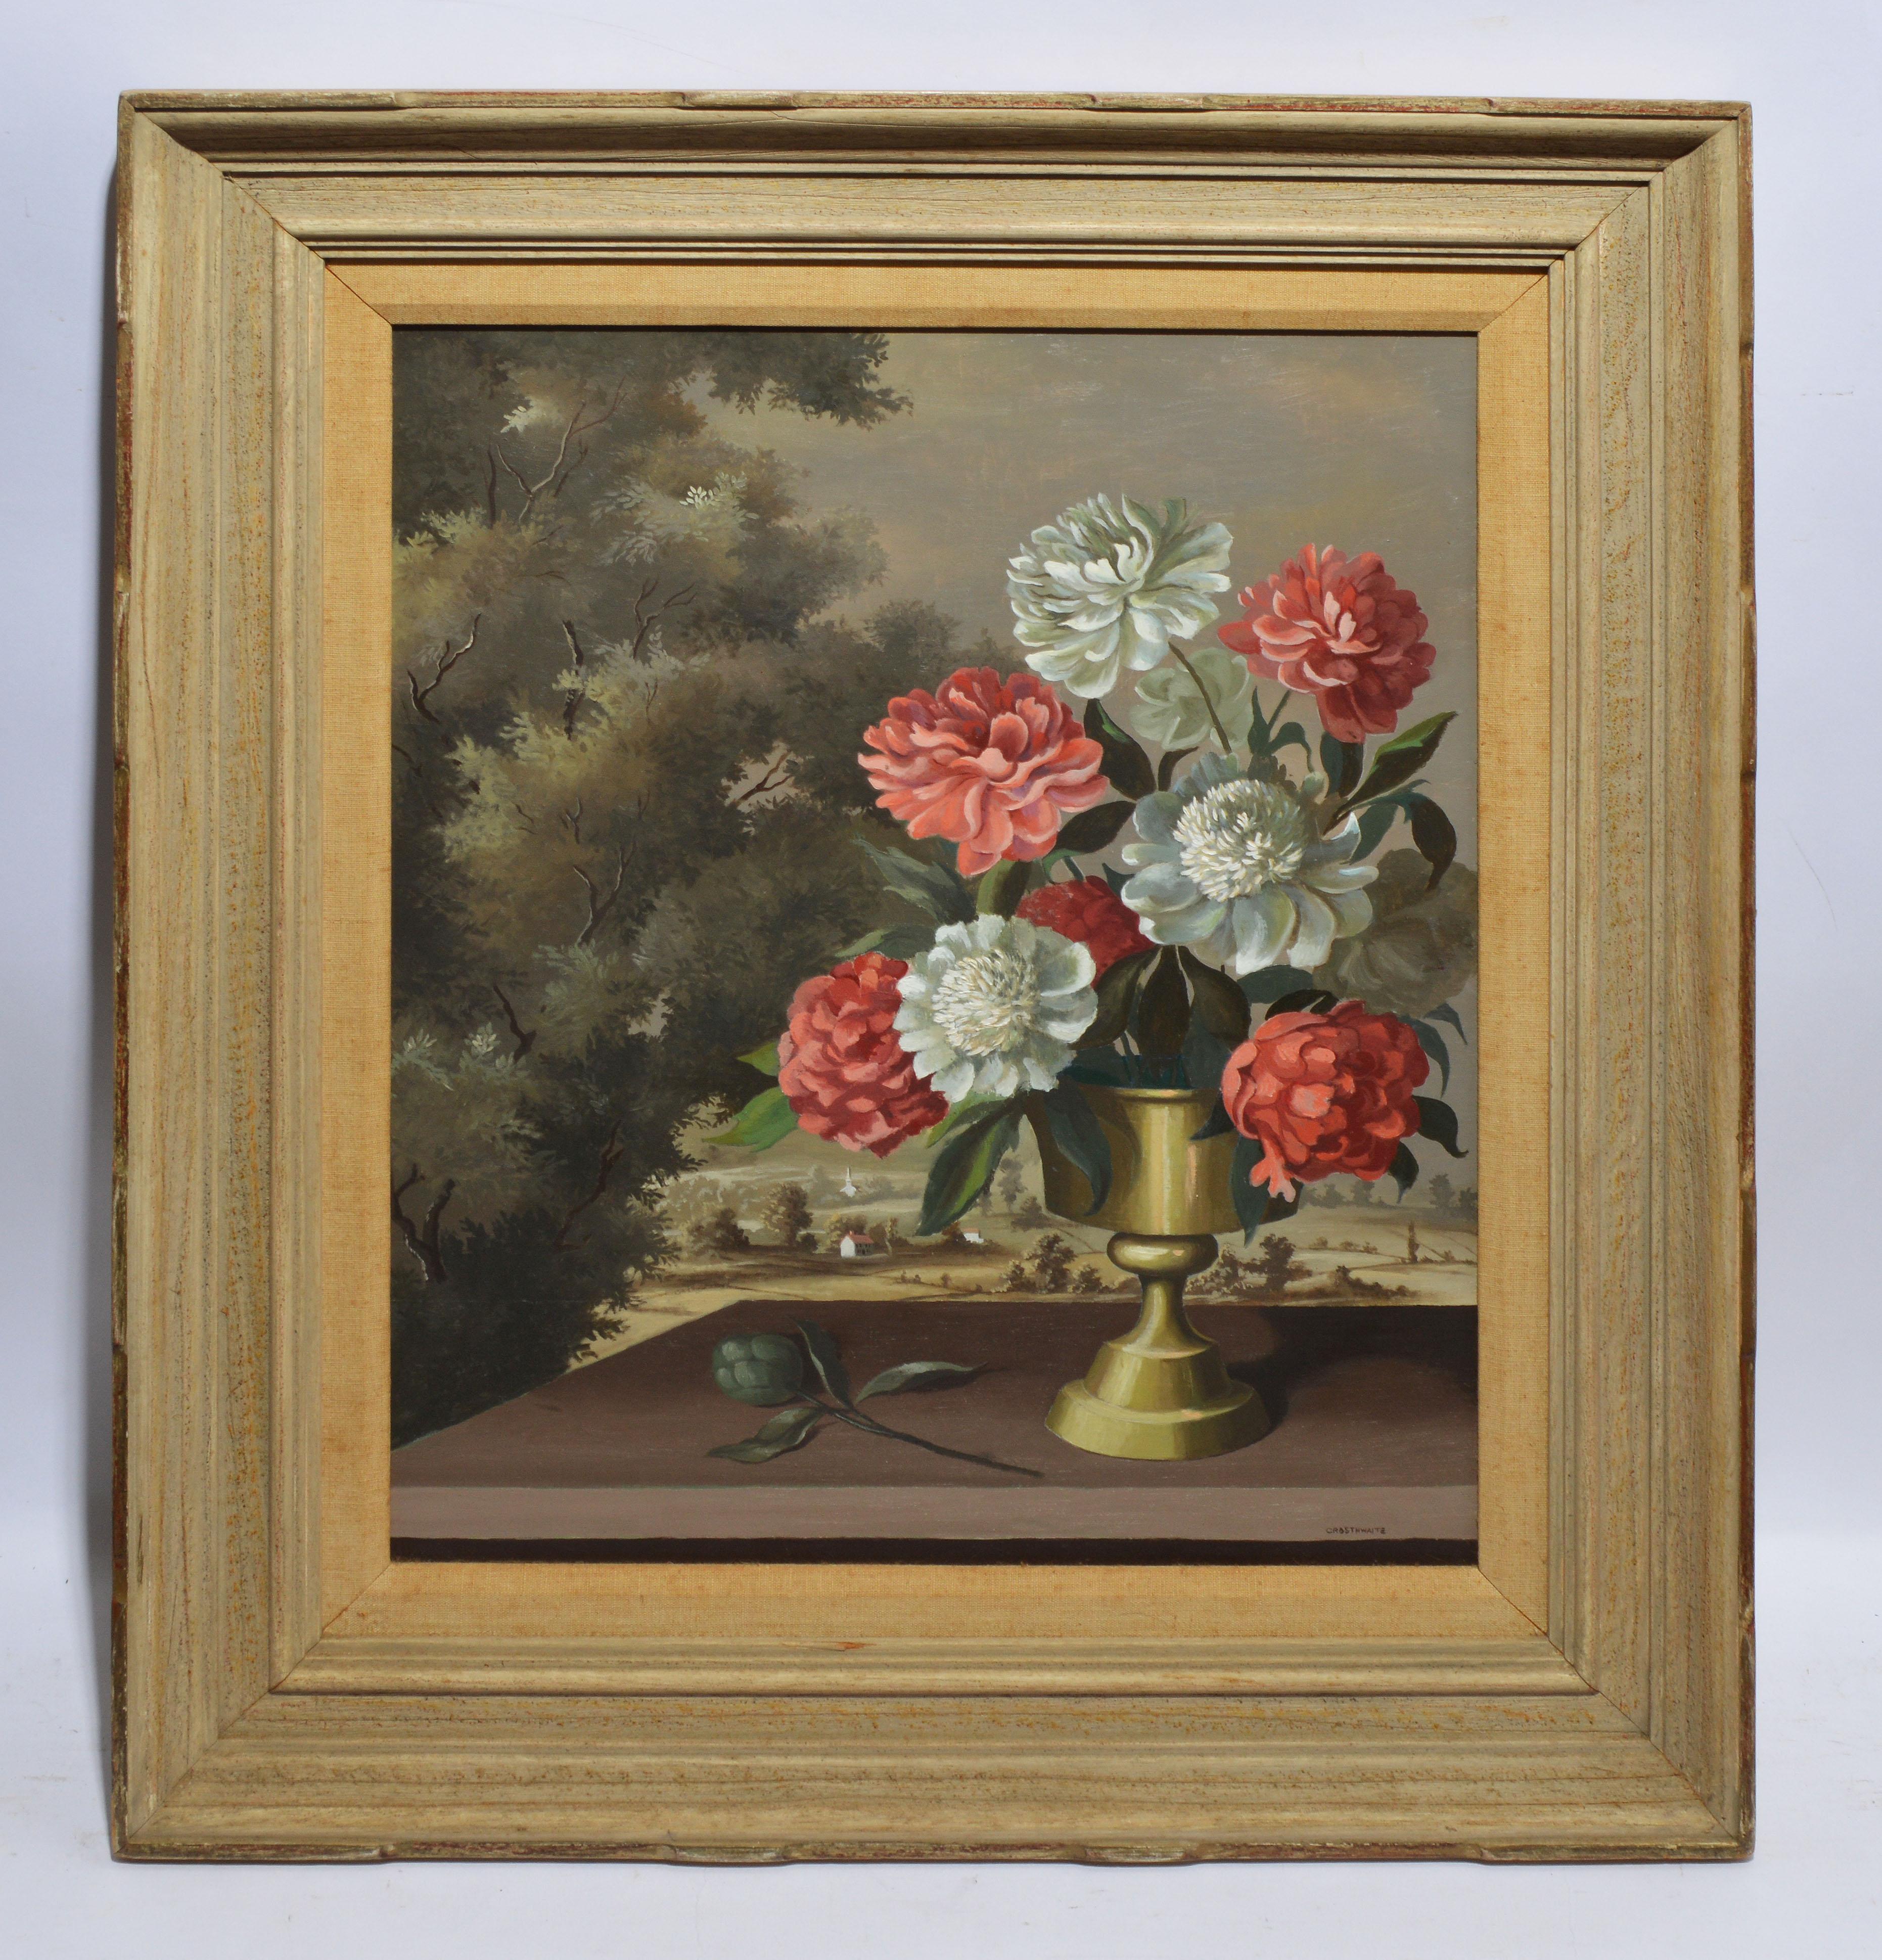 Vintage American modernist painting of flowers and a landscape by Paul Crosthwaite  (1911 - 1981).  Oil on board, circa 1950.  Signed.  Displayed in a modernist wood frame.  Image, 16